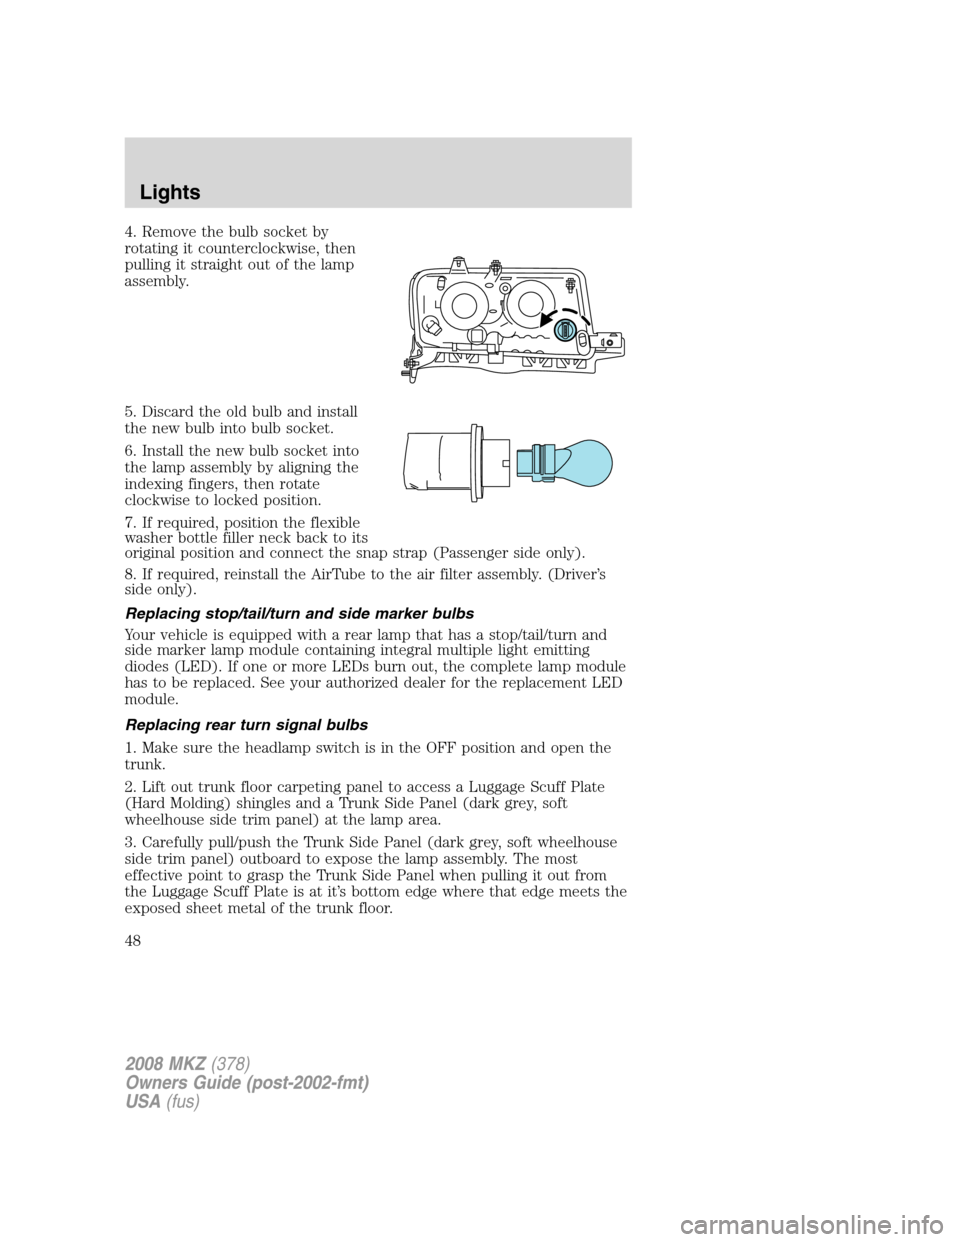 LINCOLN MKZ 2008 User Guide 4. Remove the bulb socket by
rotating it counterclockwise, then
pulling it straight out of the lamp
assembly.
5. Discard the old bulb and install
the new bulb into bulb socket.
6. Install the new bulb